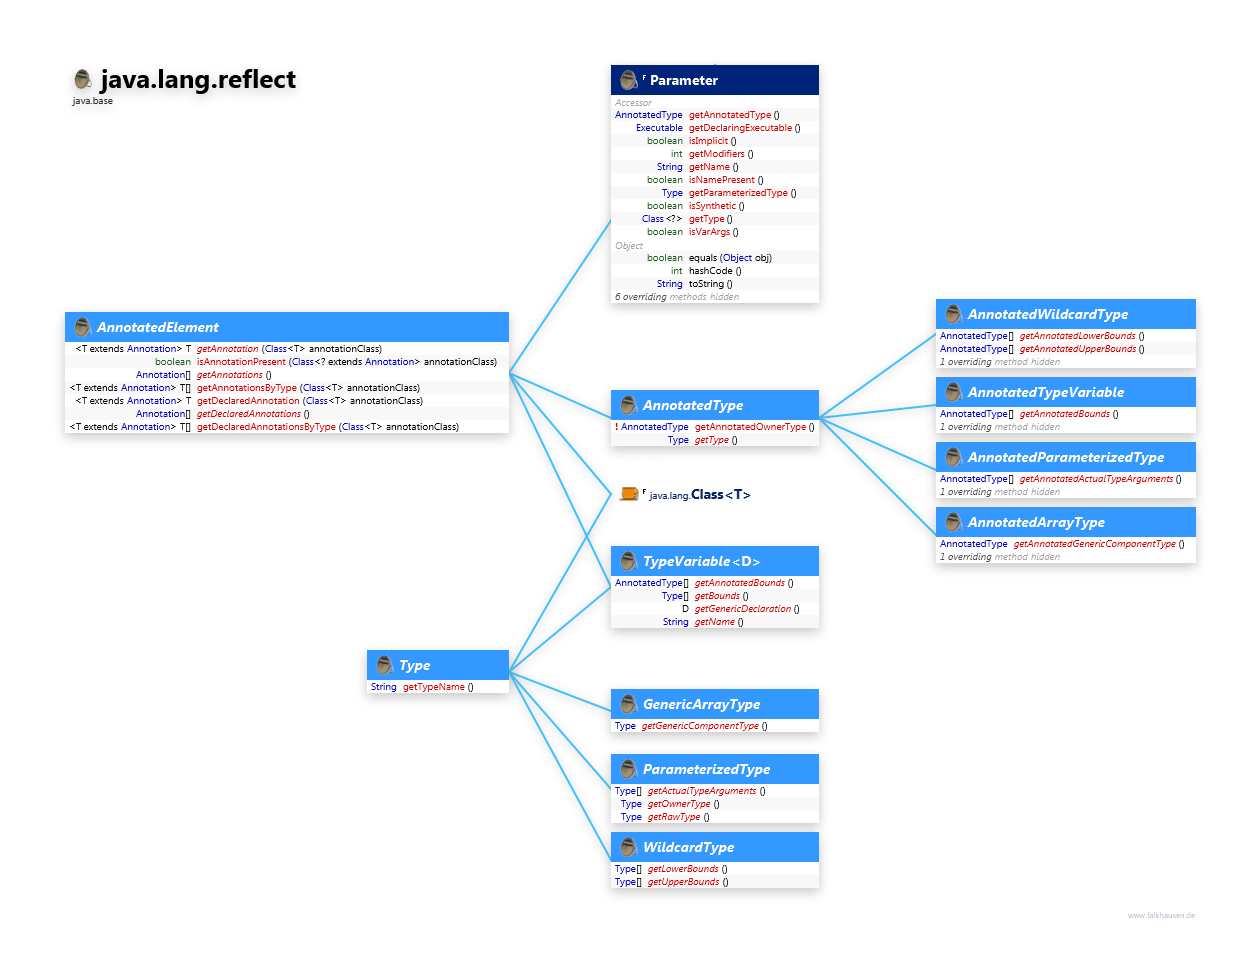 java.lang.reflect Type class diagram and api documentation for Java 10